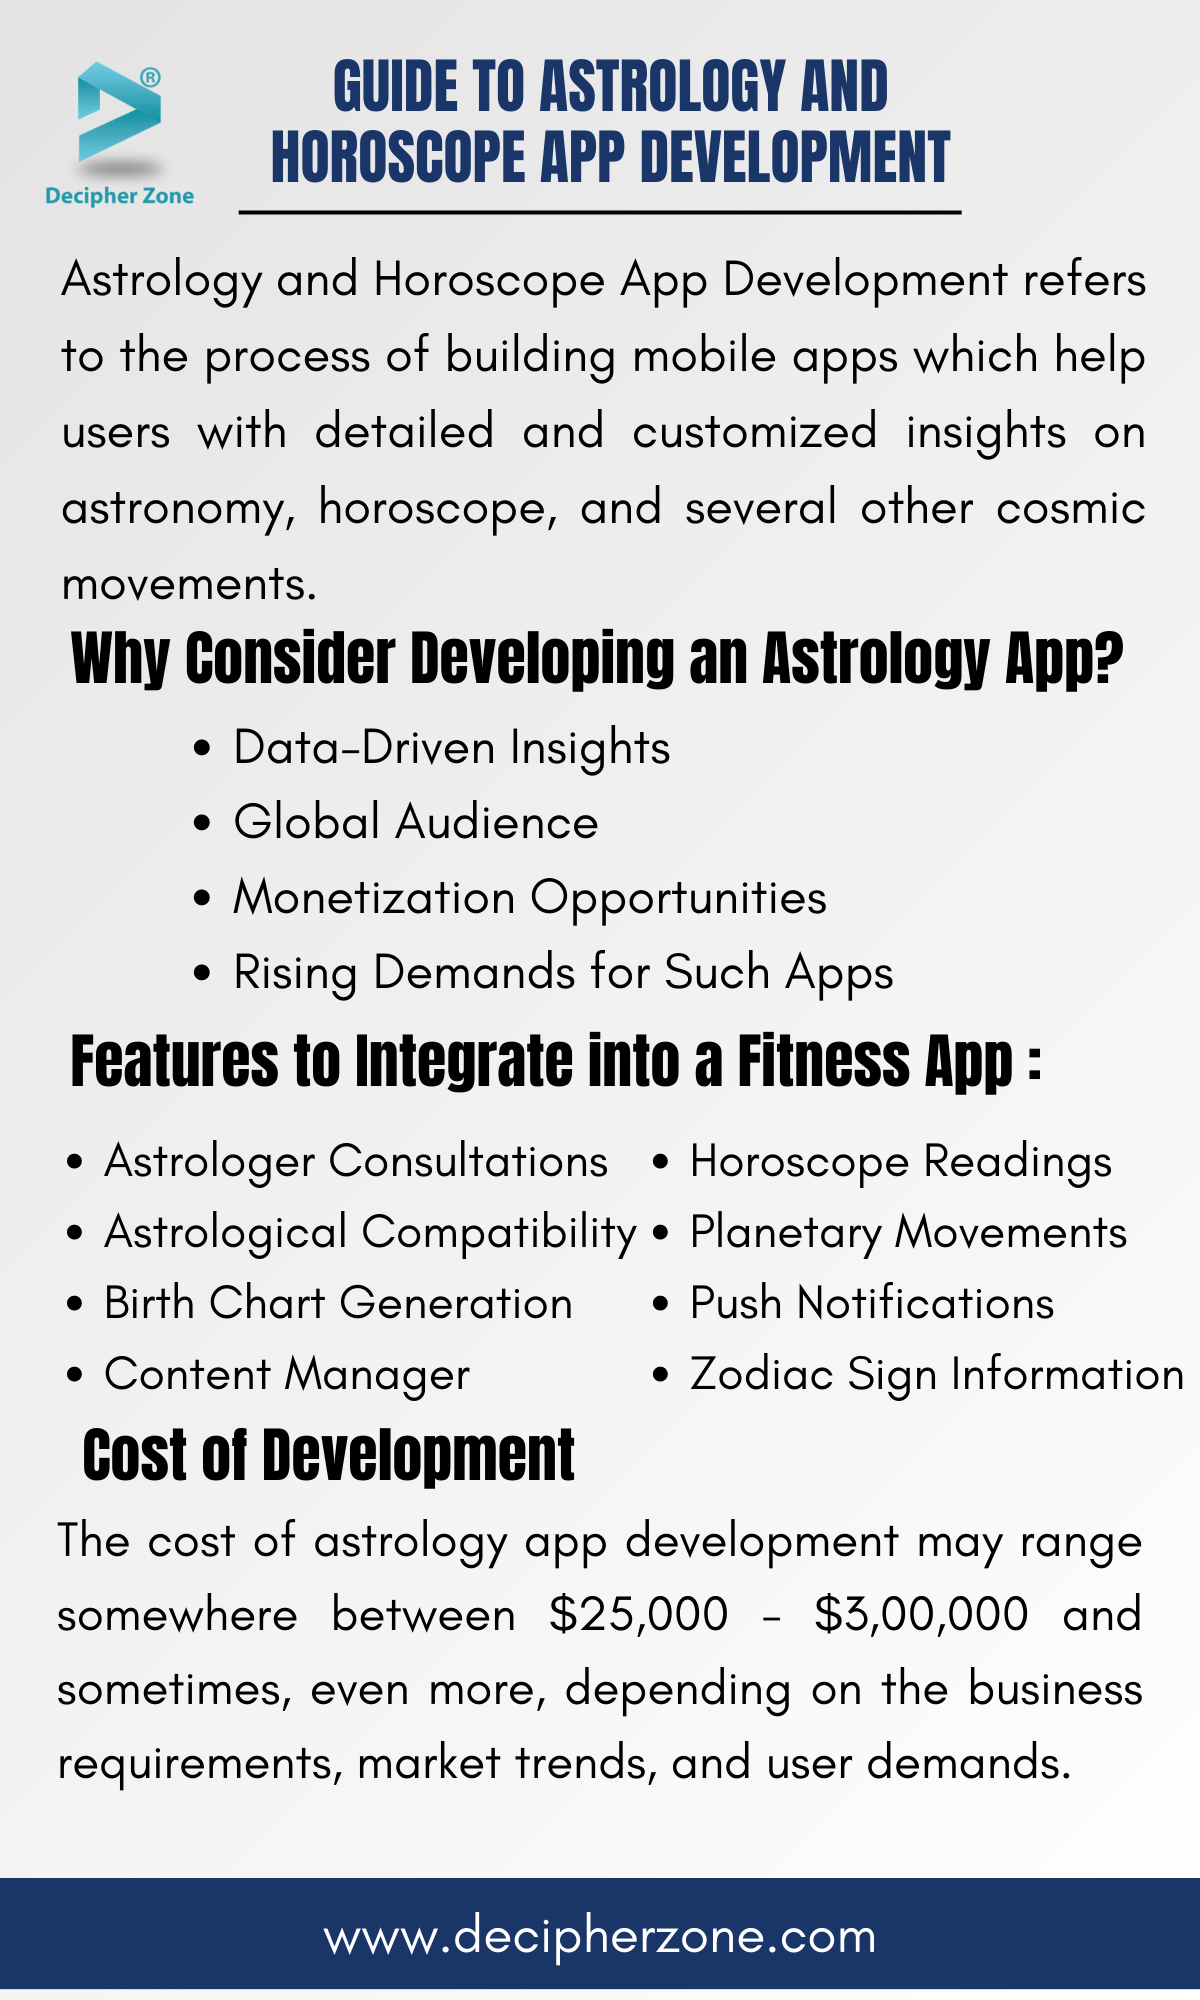 Guide to Astrology and Horoscope App Development